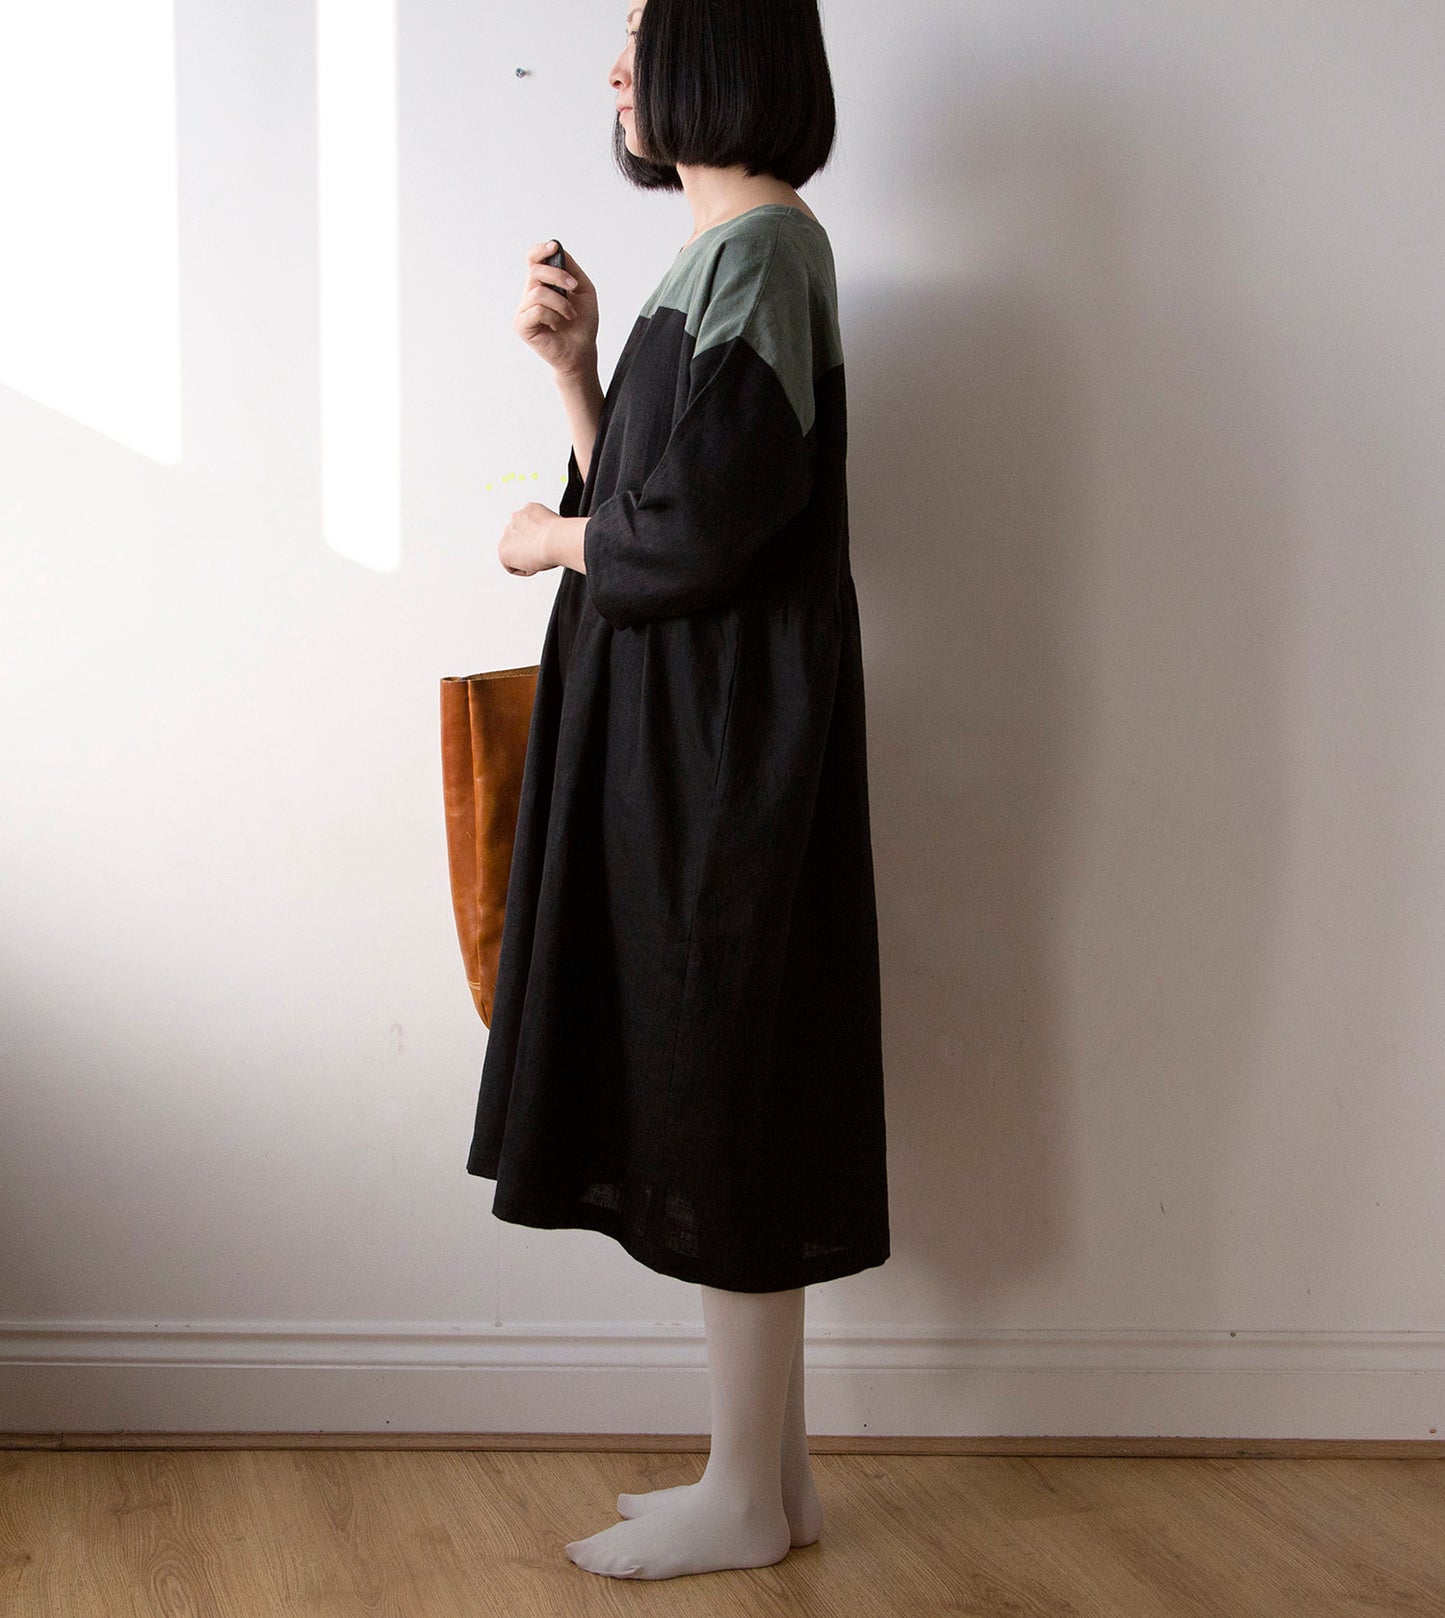 Ink black and muted green linen dress